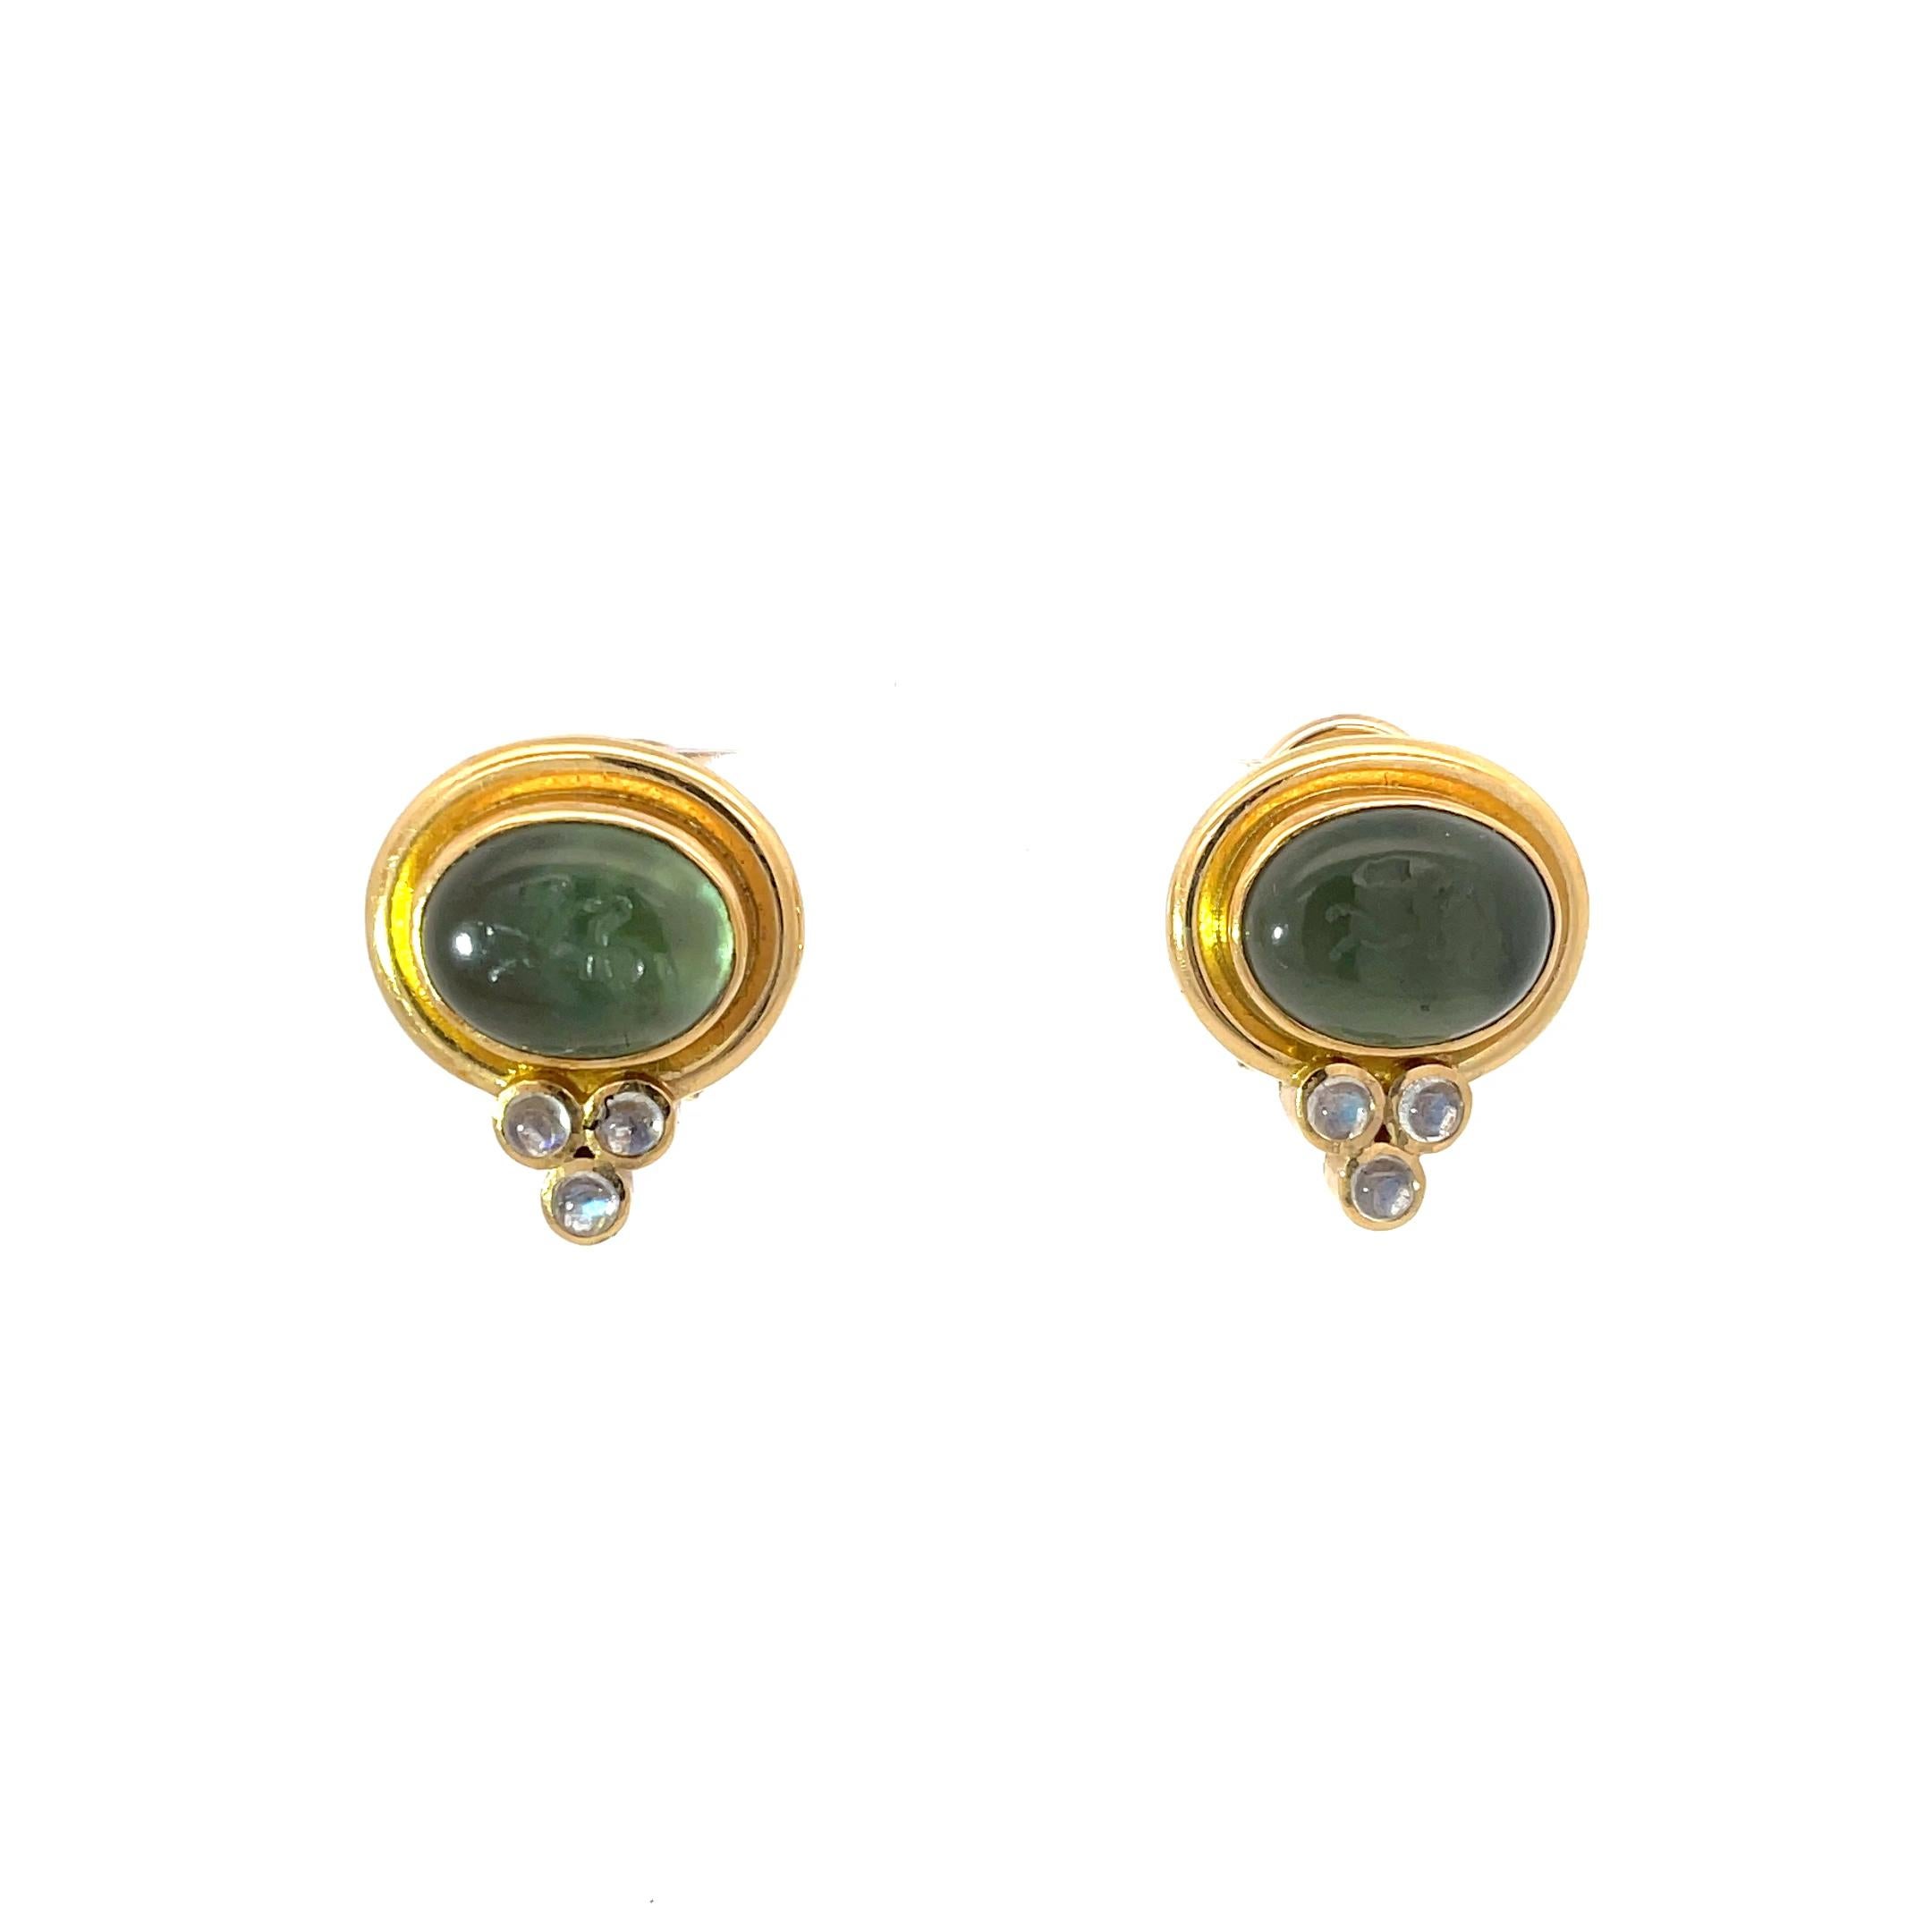 Elizabeth Locke Intaglio and Moonstone Earrings in 18K Yellow Gold. The earrings feature collapsible posts & omega clip backs. Measure 23mm x 19mm and weigh 16 grams.